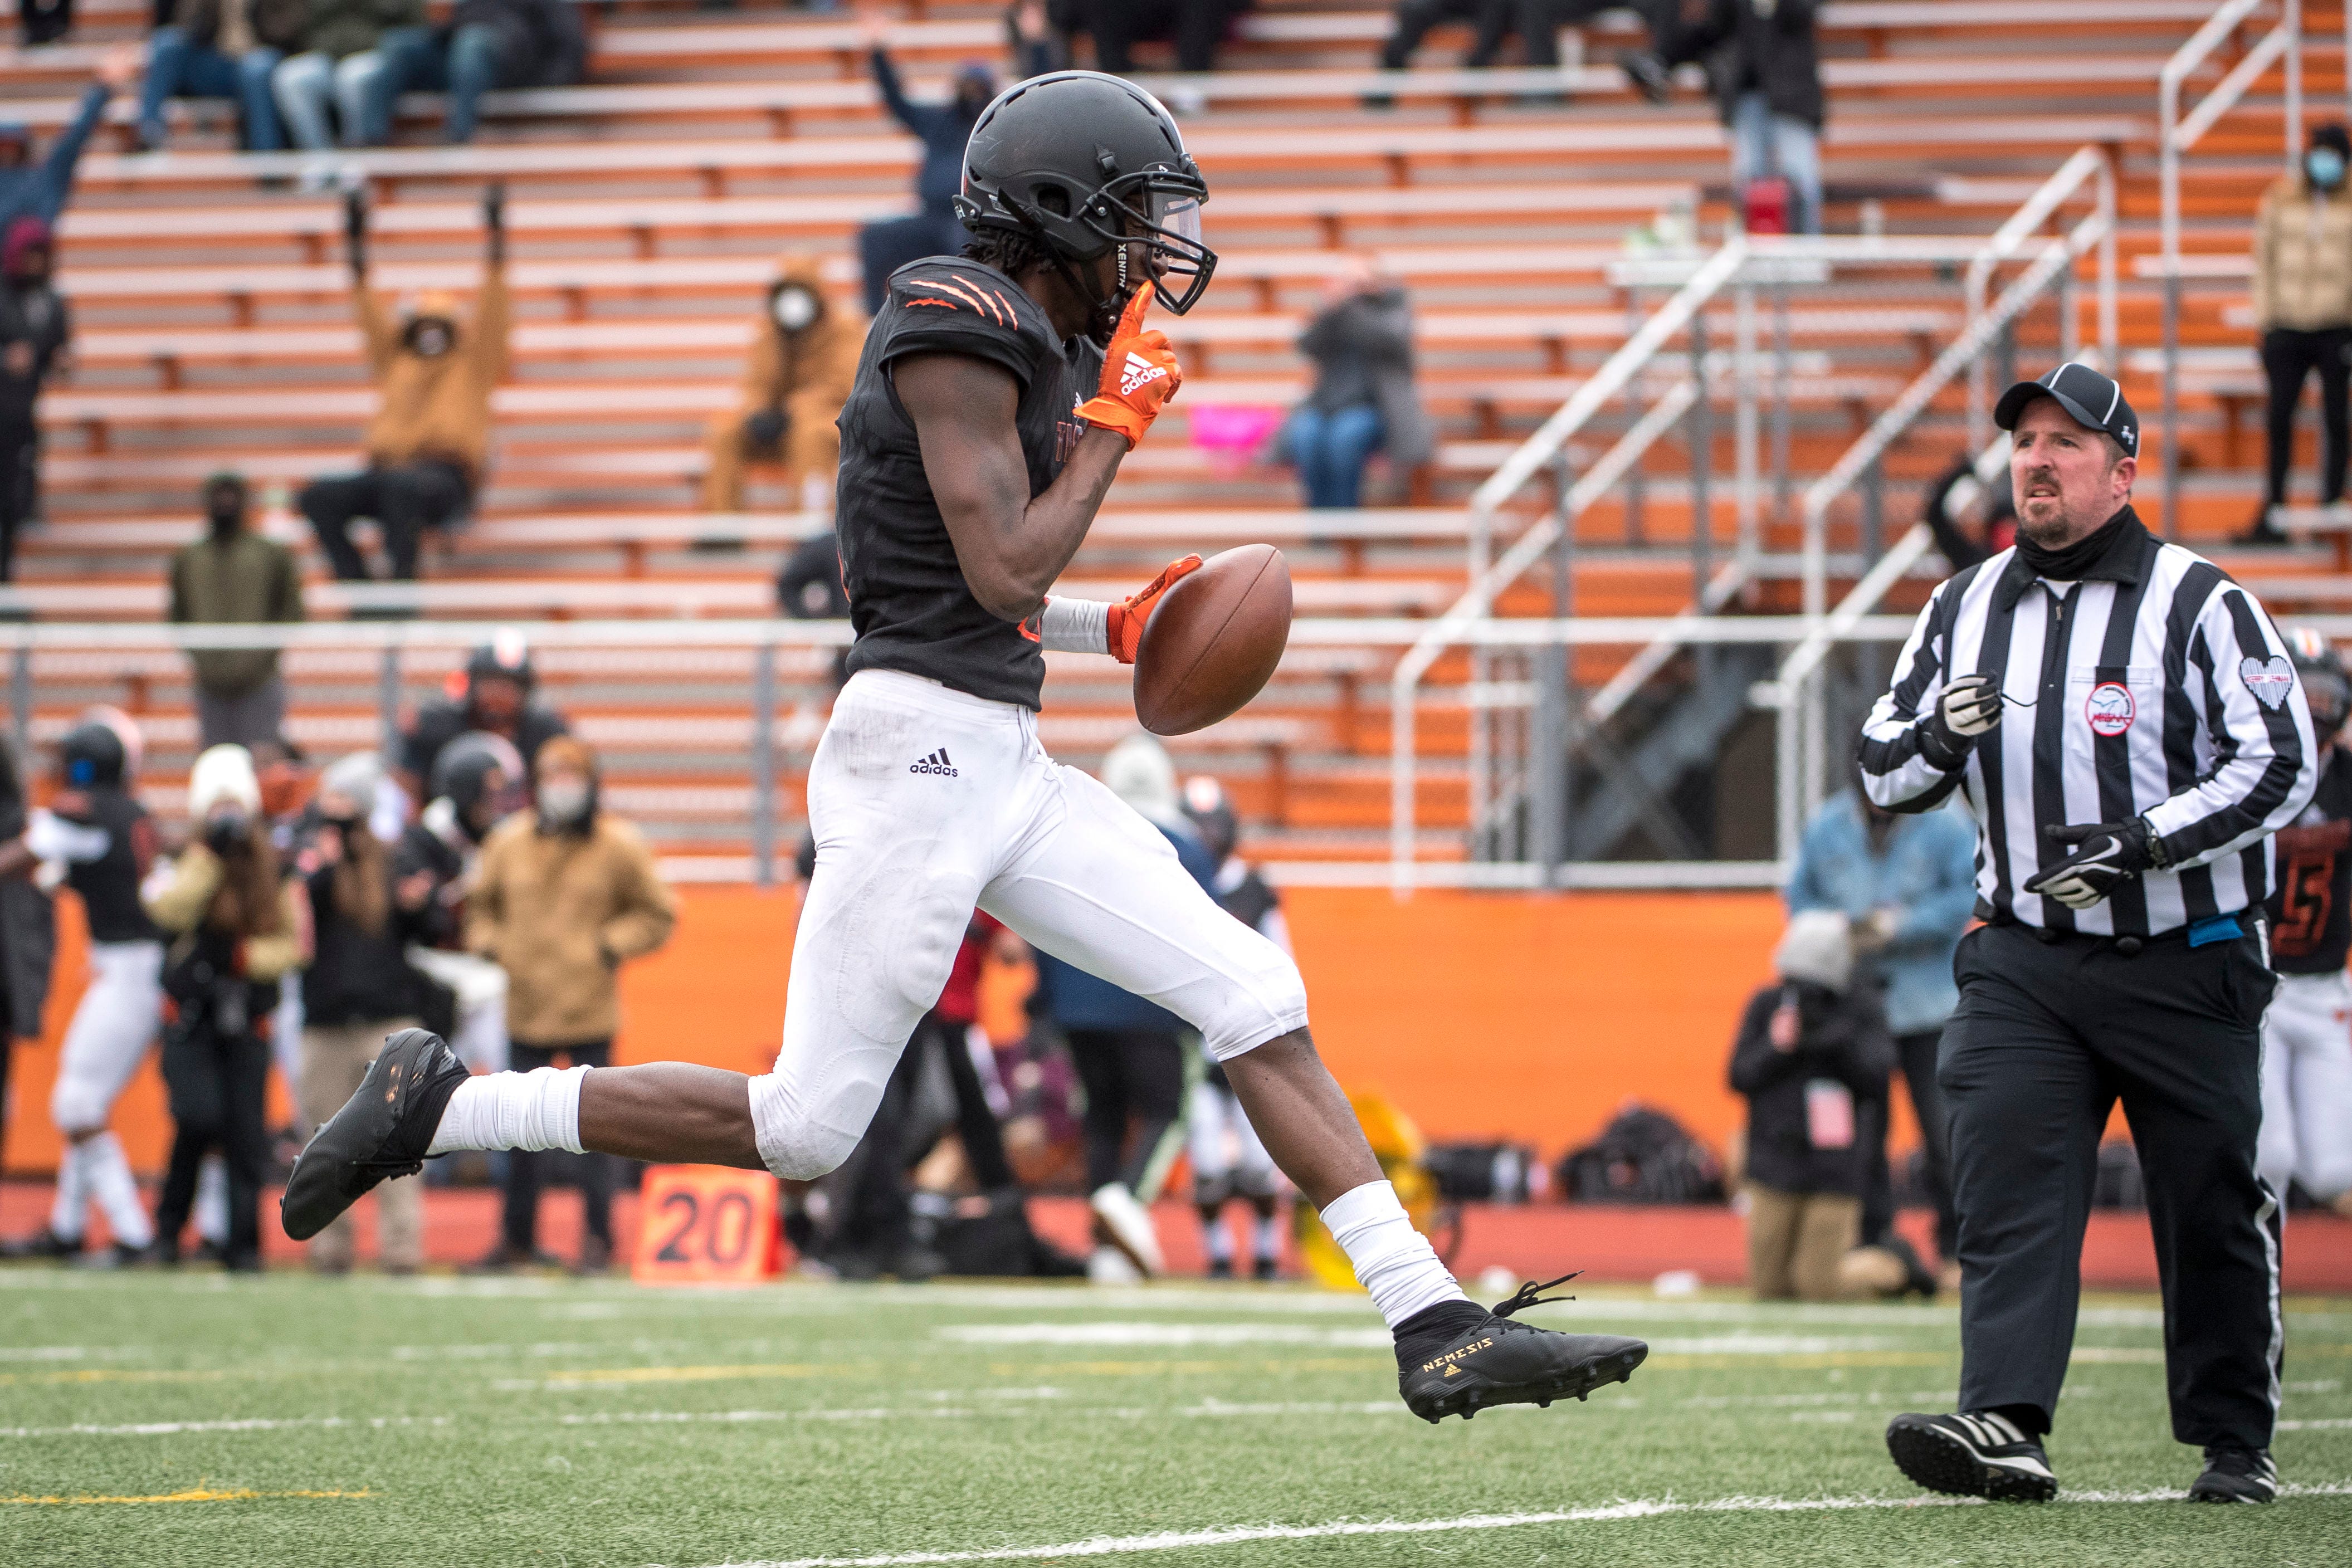 Belleville junior wide receiver Jeremiah Caldwell (2) scores on a touchdown pass during the fourth quarter.